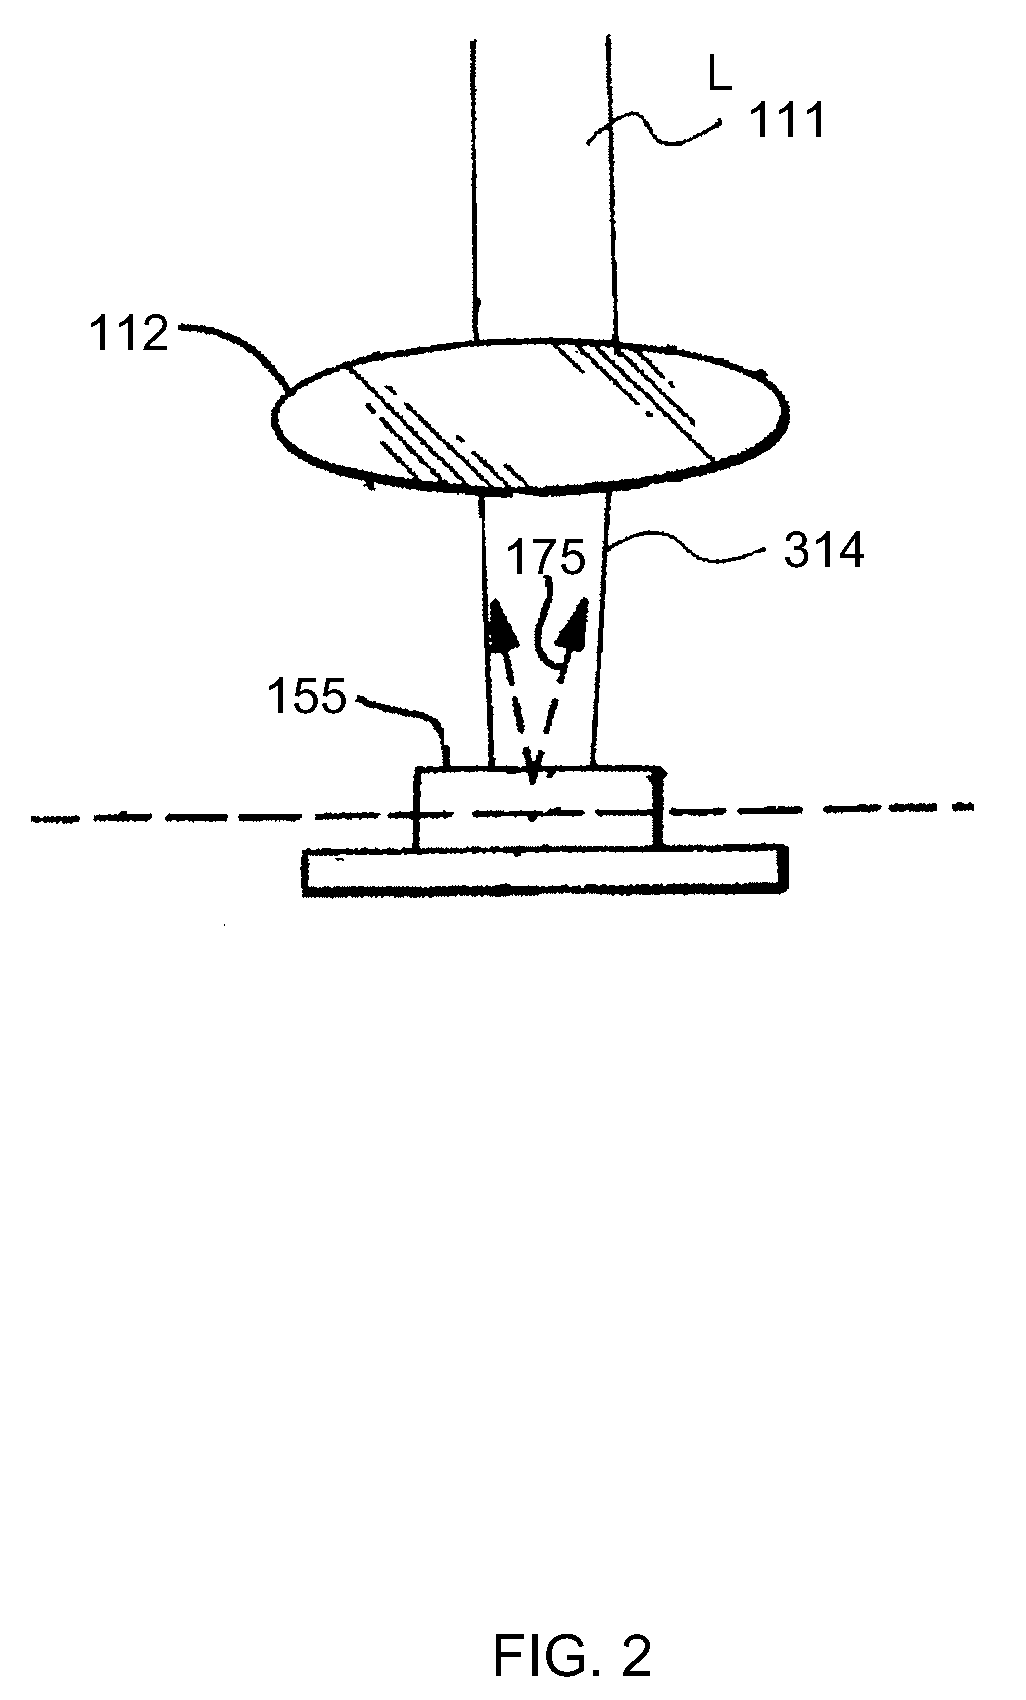 Non-imaging, weakly focused fluorescence emission apparatus and method